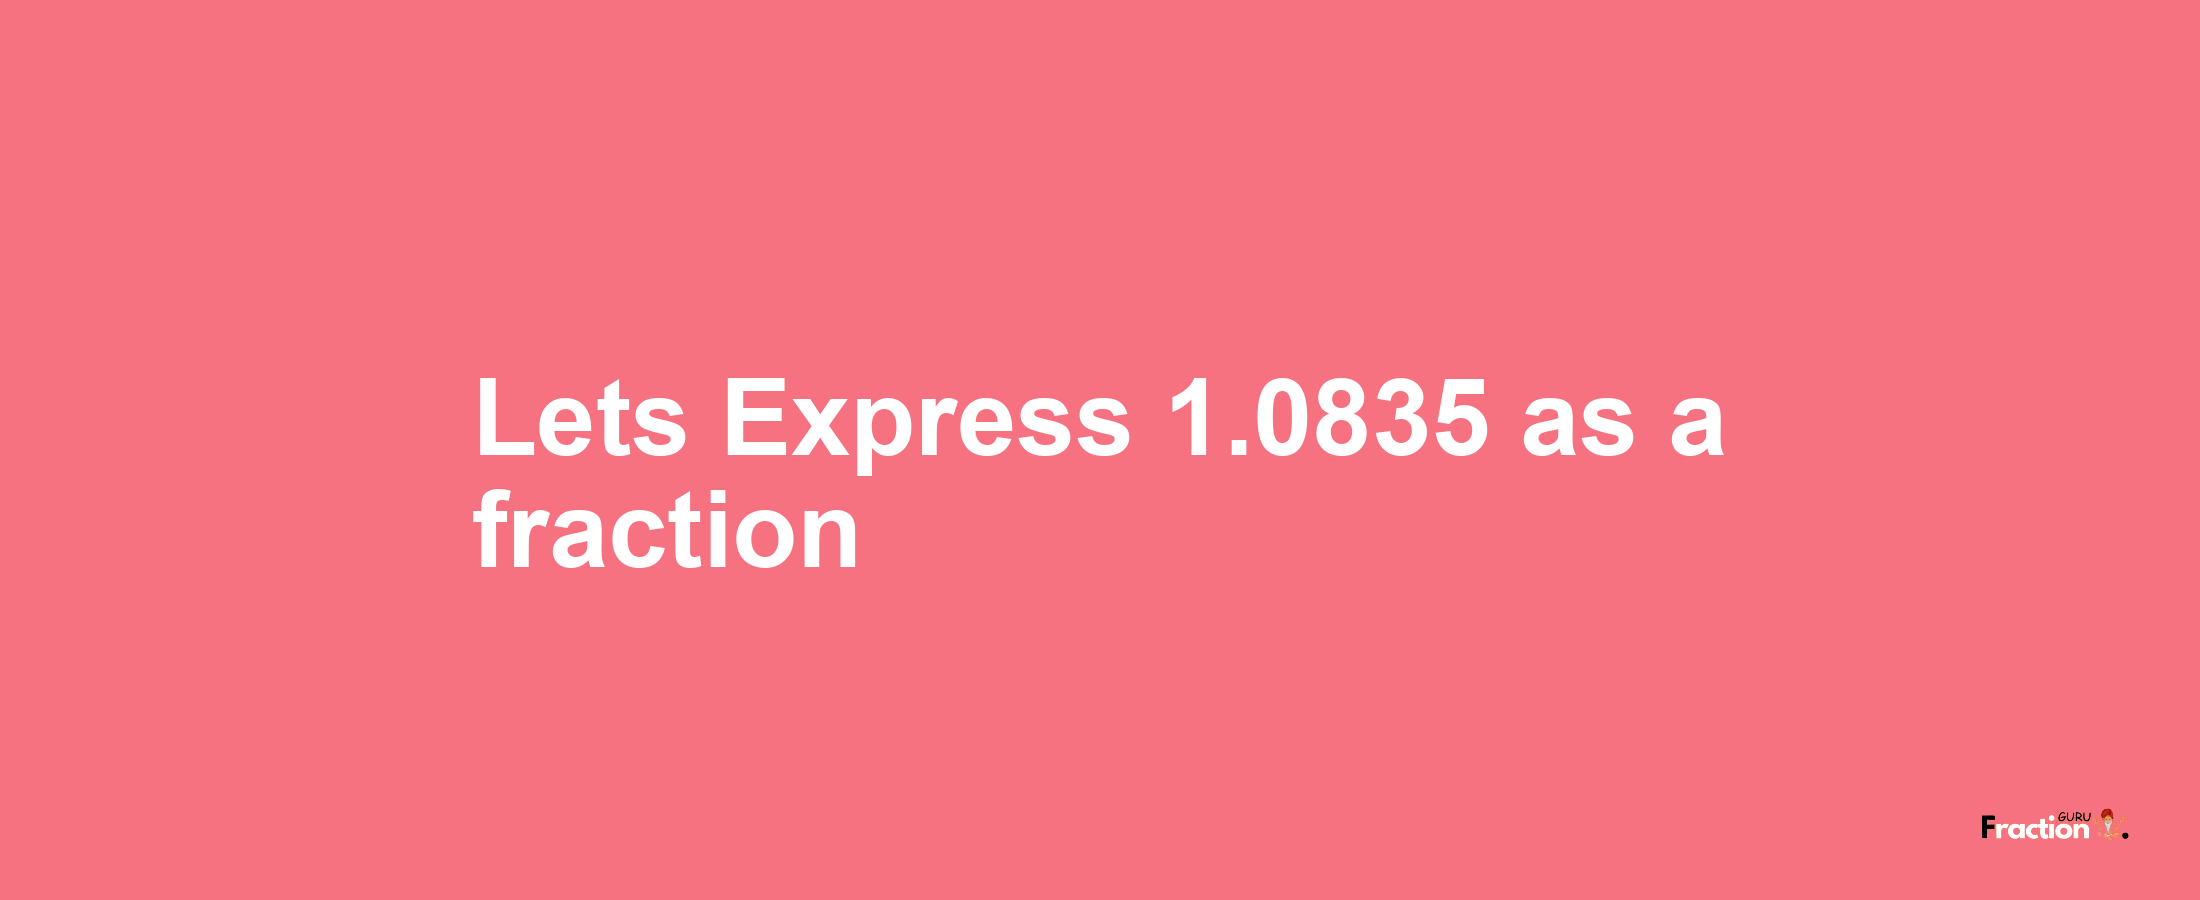 Lets Express 1.0835 as afraction